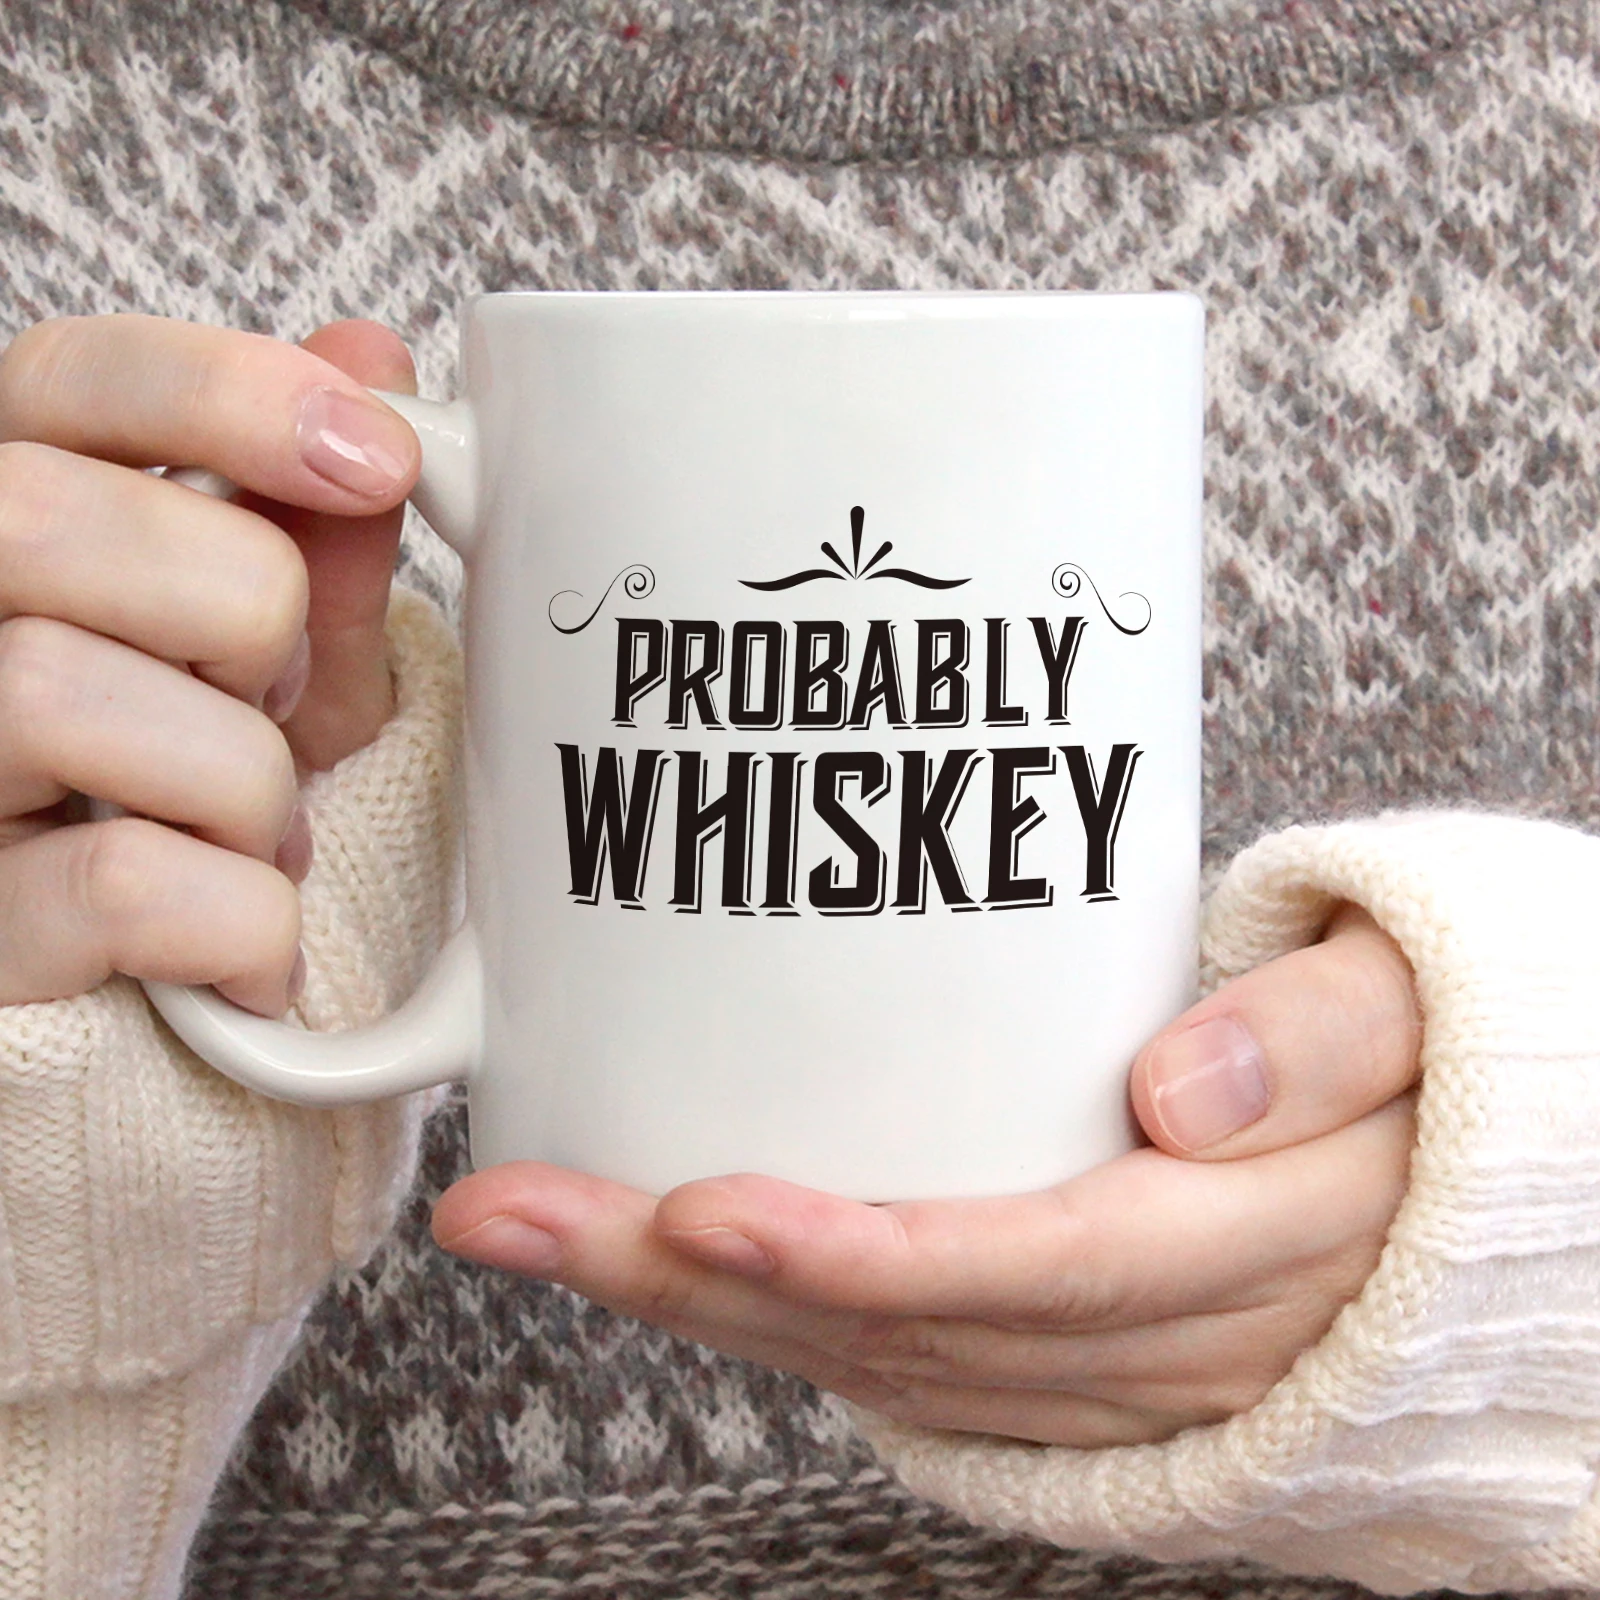 

Probably Whiskey Coffee Mug Funny Bar Gift for Whiskey Great Gift Idea For Men whiskey Enthusiast Humor Brother or Friend 11oz